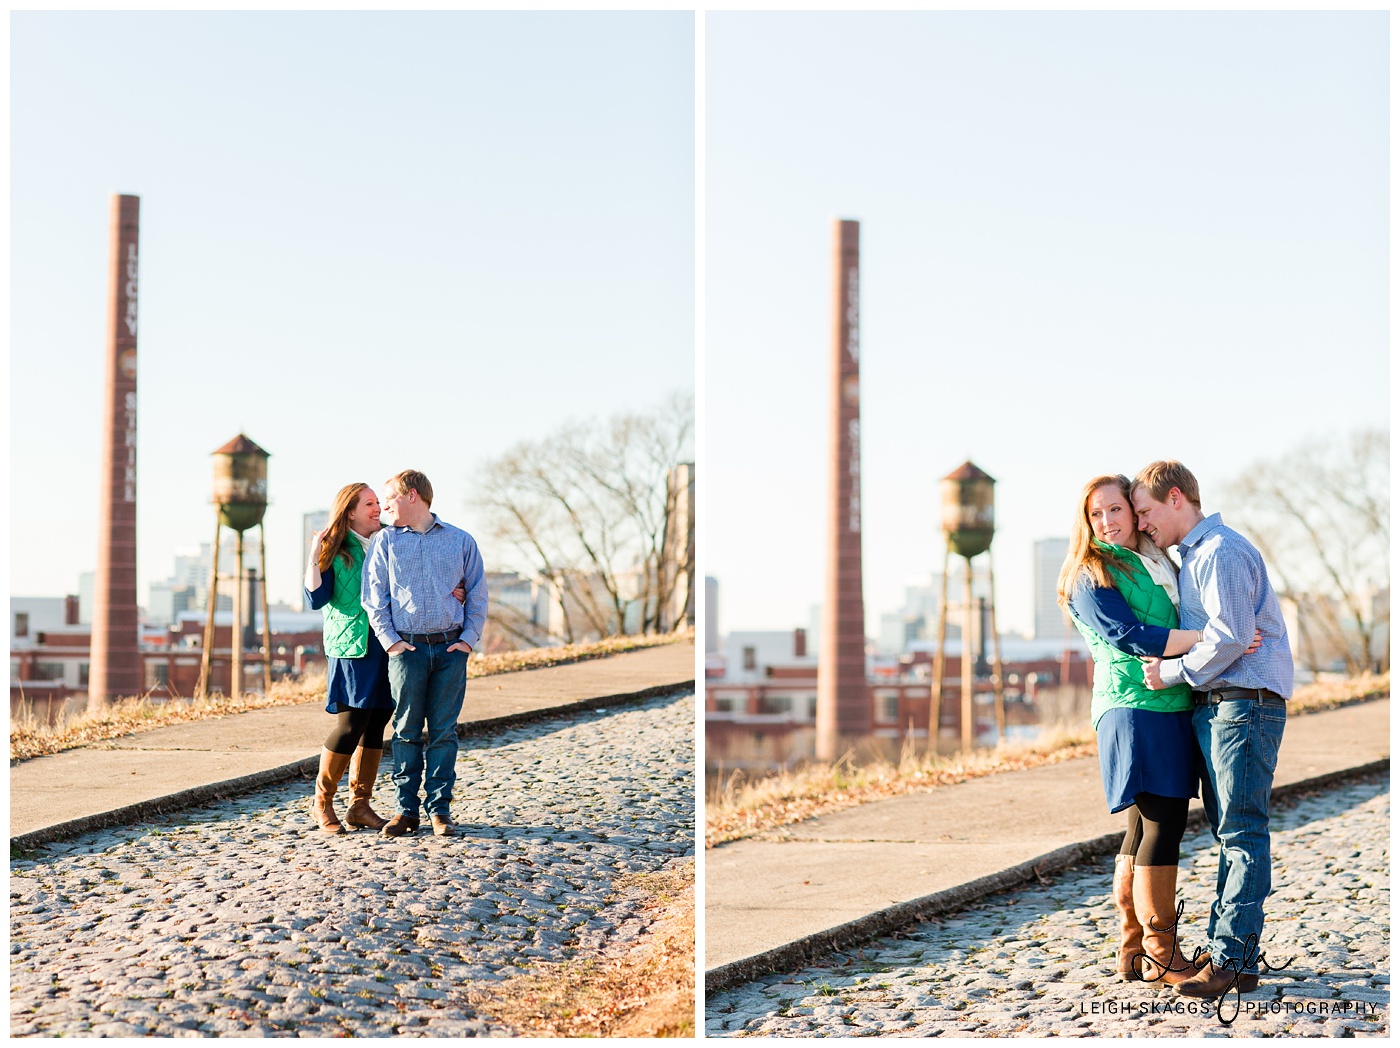 Becca & Thomas | Libby Hill Park and Tredegar Engagement session